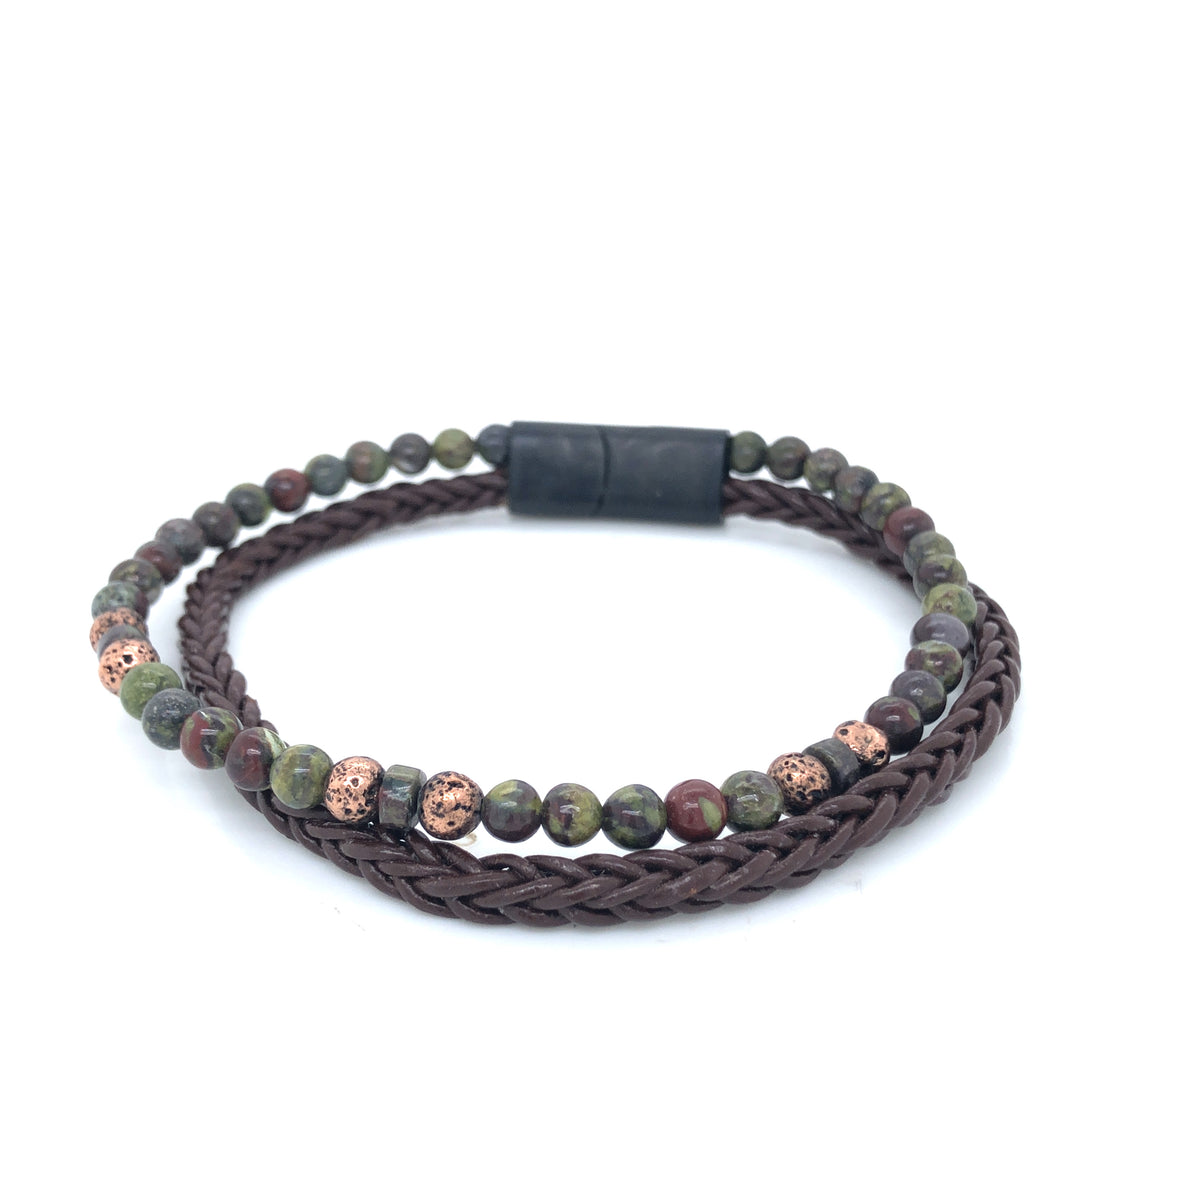 Double Strand Brown Leather Braided Bracelet Featuring Green Agate Beads And Vintage Beads